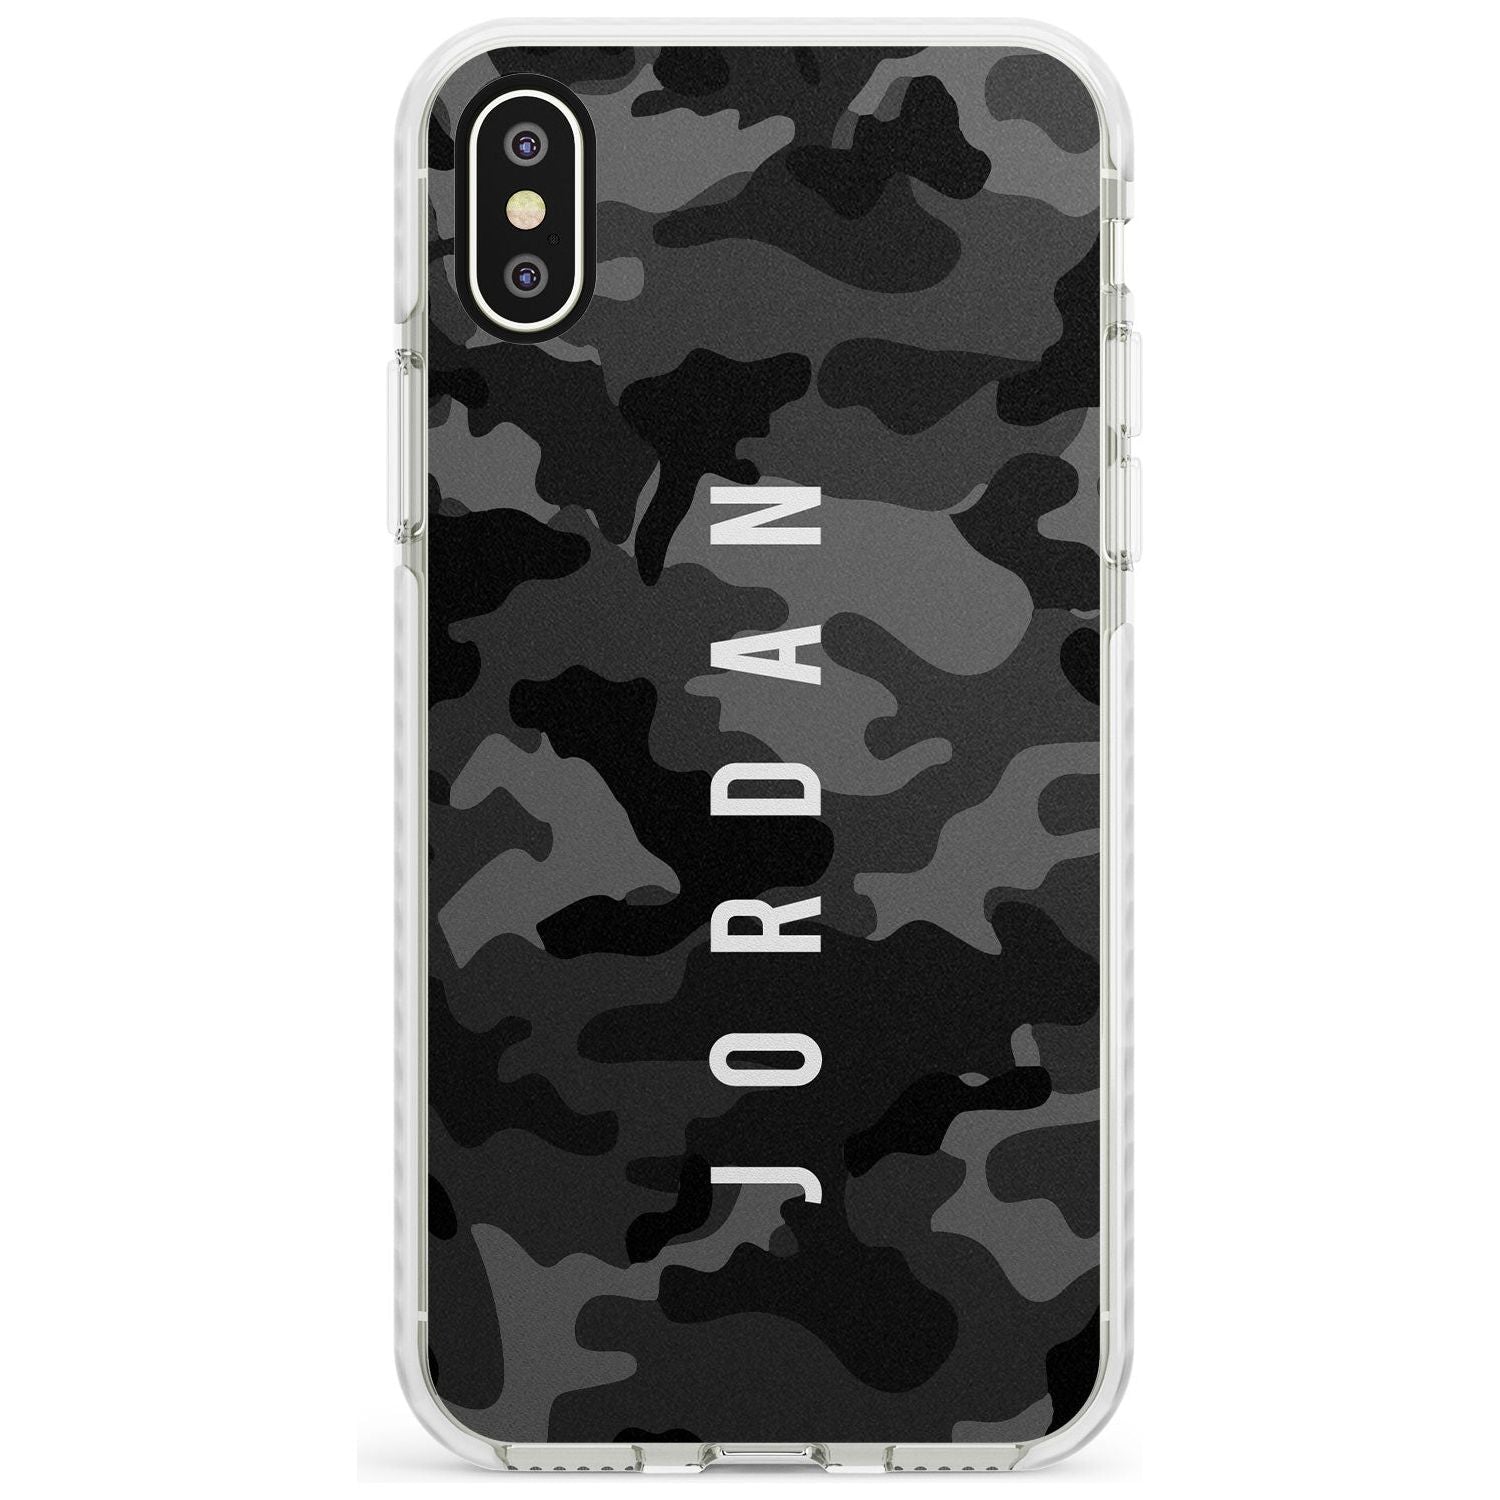 Small Vertical Name Personalised Black Camouflage Impact Phone Case for iPhone X XS Max XR